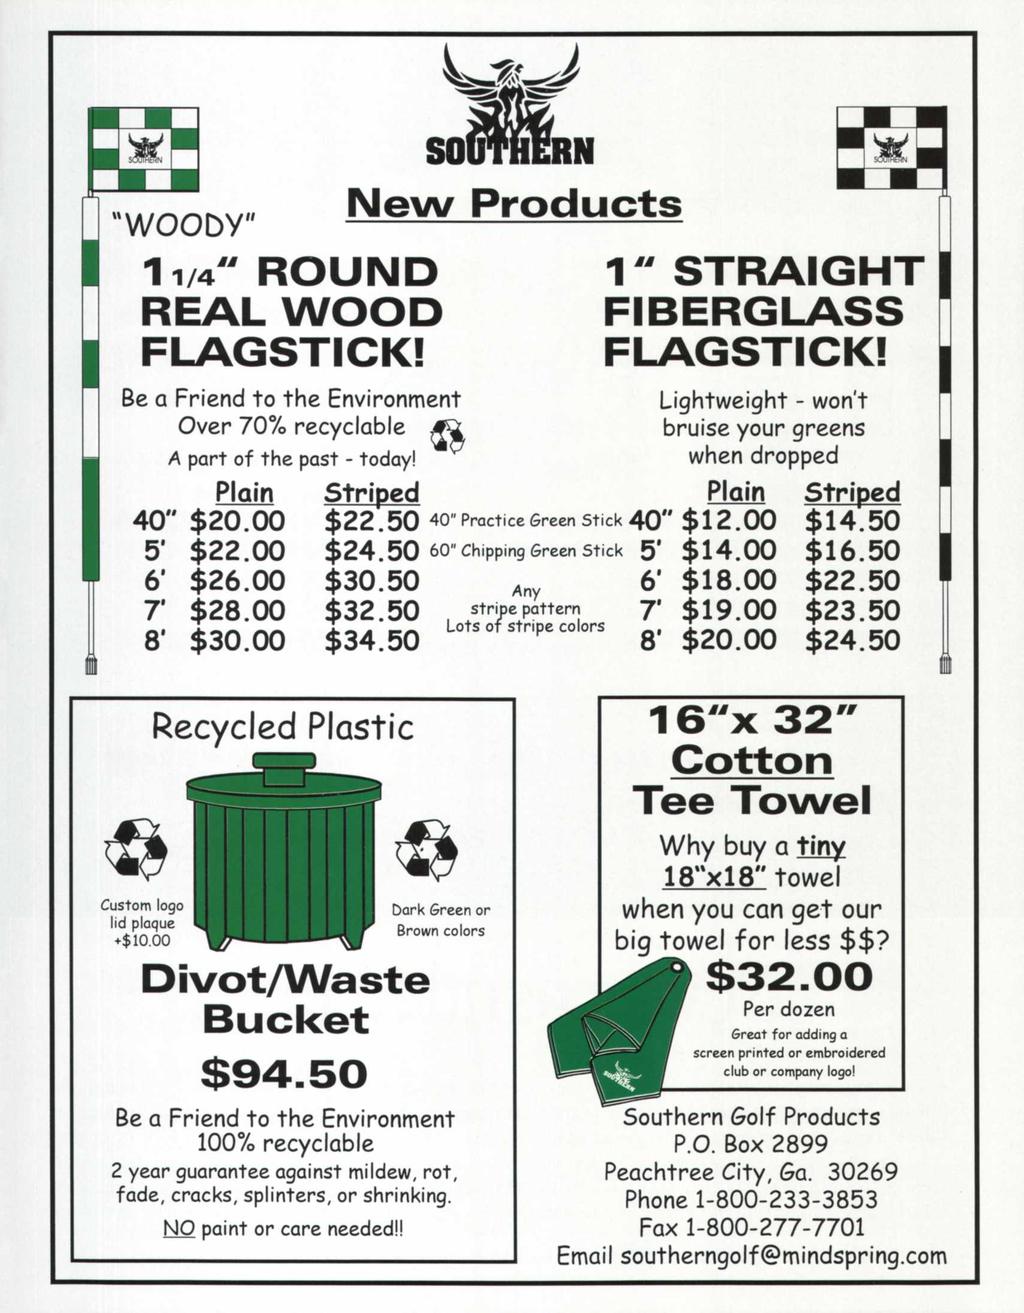 "WOODY" 11/4" ROUND REAL WOOD FLAGSTICK! Be a Friend to the Environment Over 70% recyclable ^ A part of the past - today! Plain 40" $20.00 5* $22.00 6' $26.00 7' $28.00 8' $30.